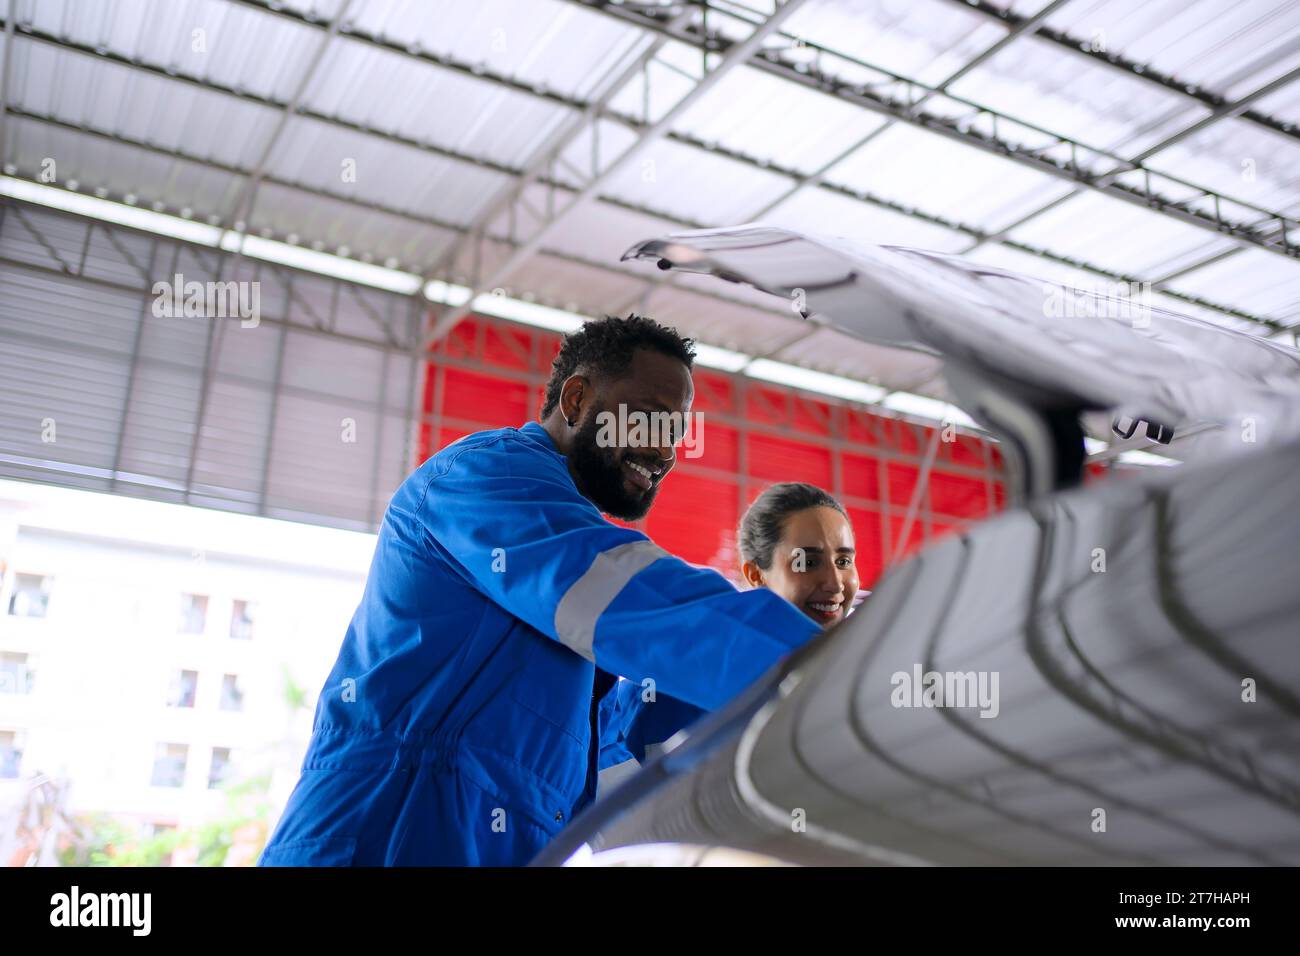 Mechanic work at auto repair shop. Small business and engineering concept. Stock Photo